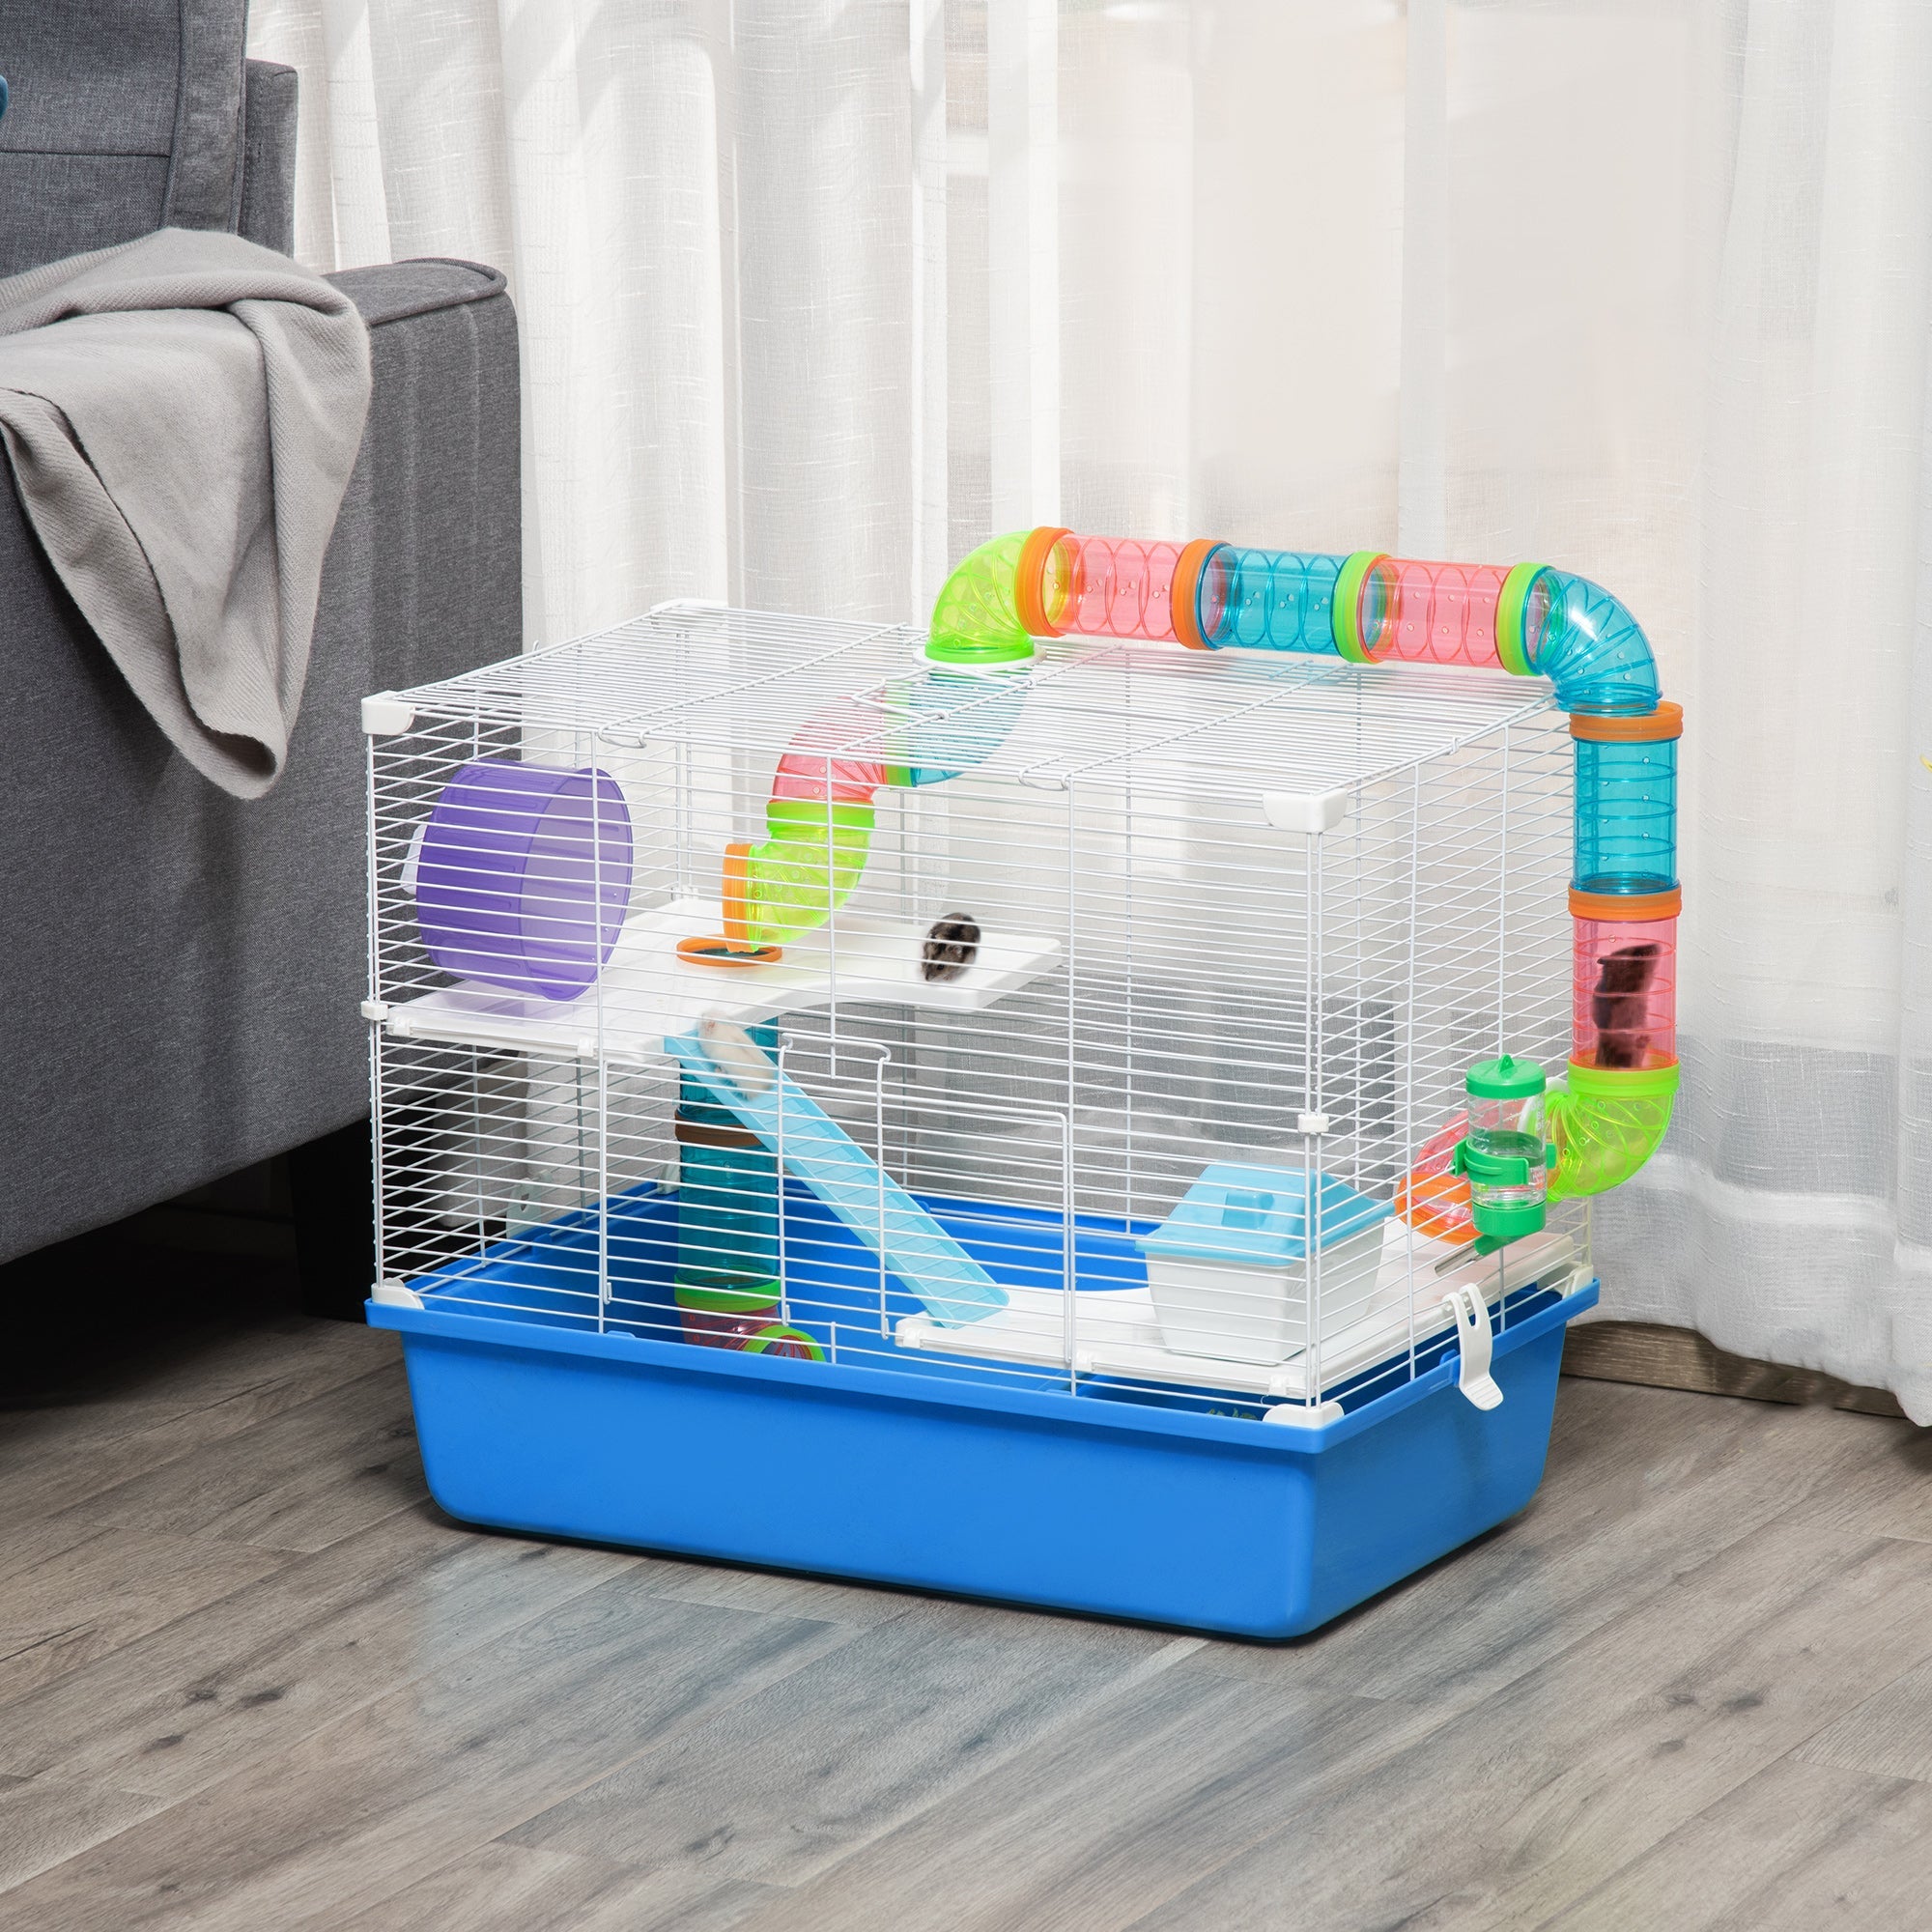 Large Hamster Cage, 3-Level Small Rodents House, with Tube Tunnel, Exercise Wheel, Water Bottle, Food Dish, Ramps, Hut, 59 x 36 x 47 cm, Blue-1